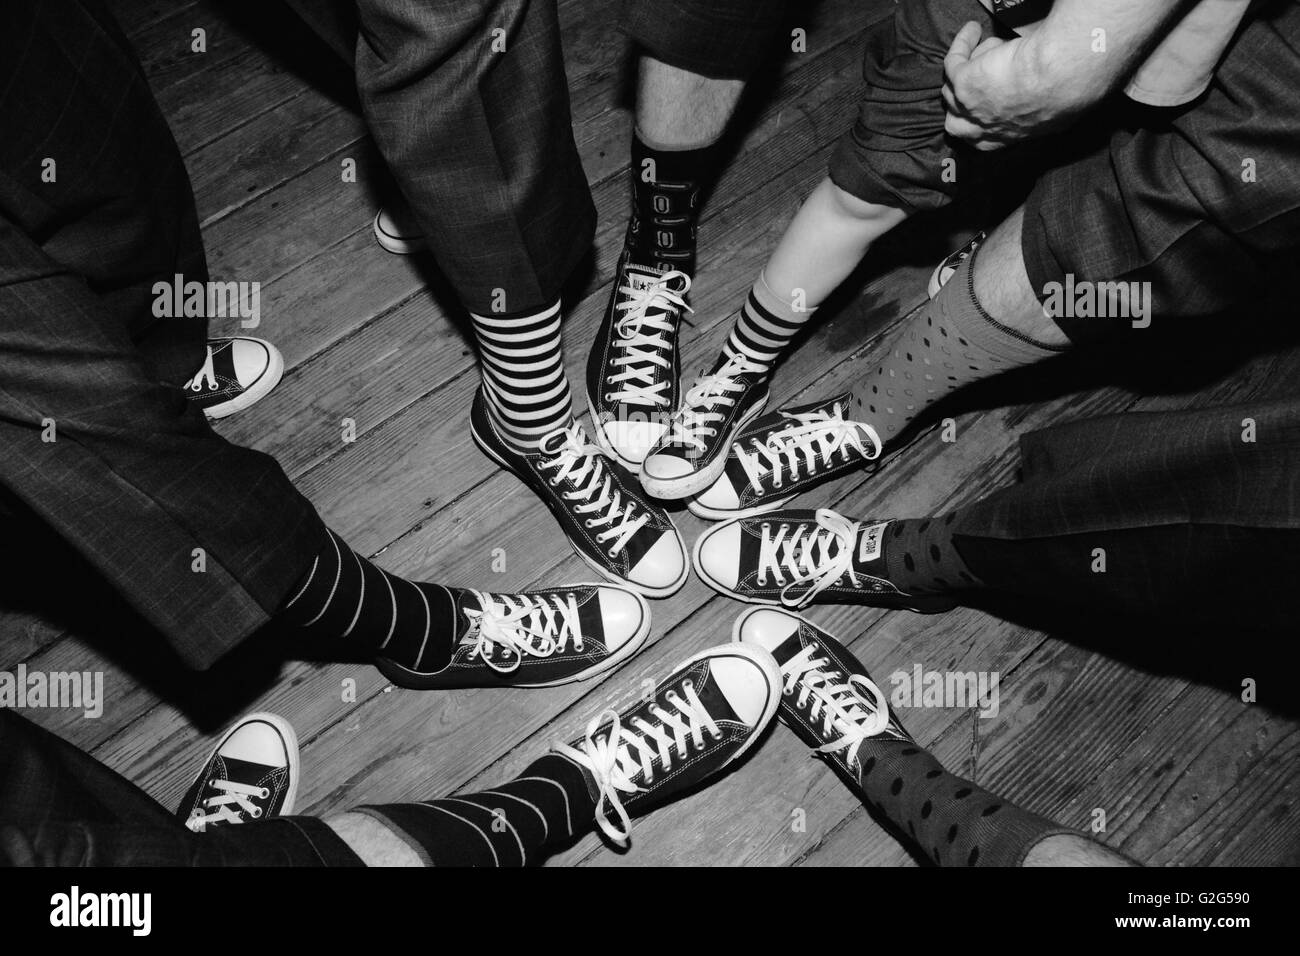 Group of Men Showing Converse Sneakers and Socks at Wedding, High Angle  View Stock Photo - Alamy